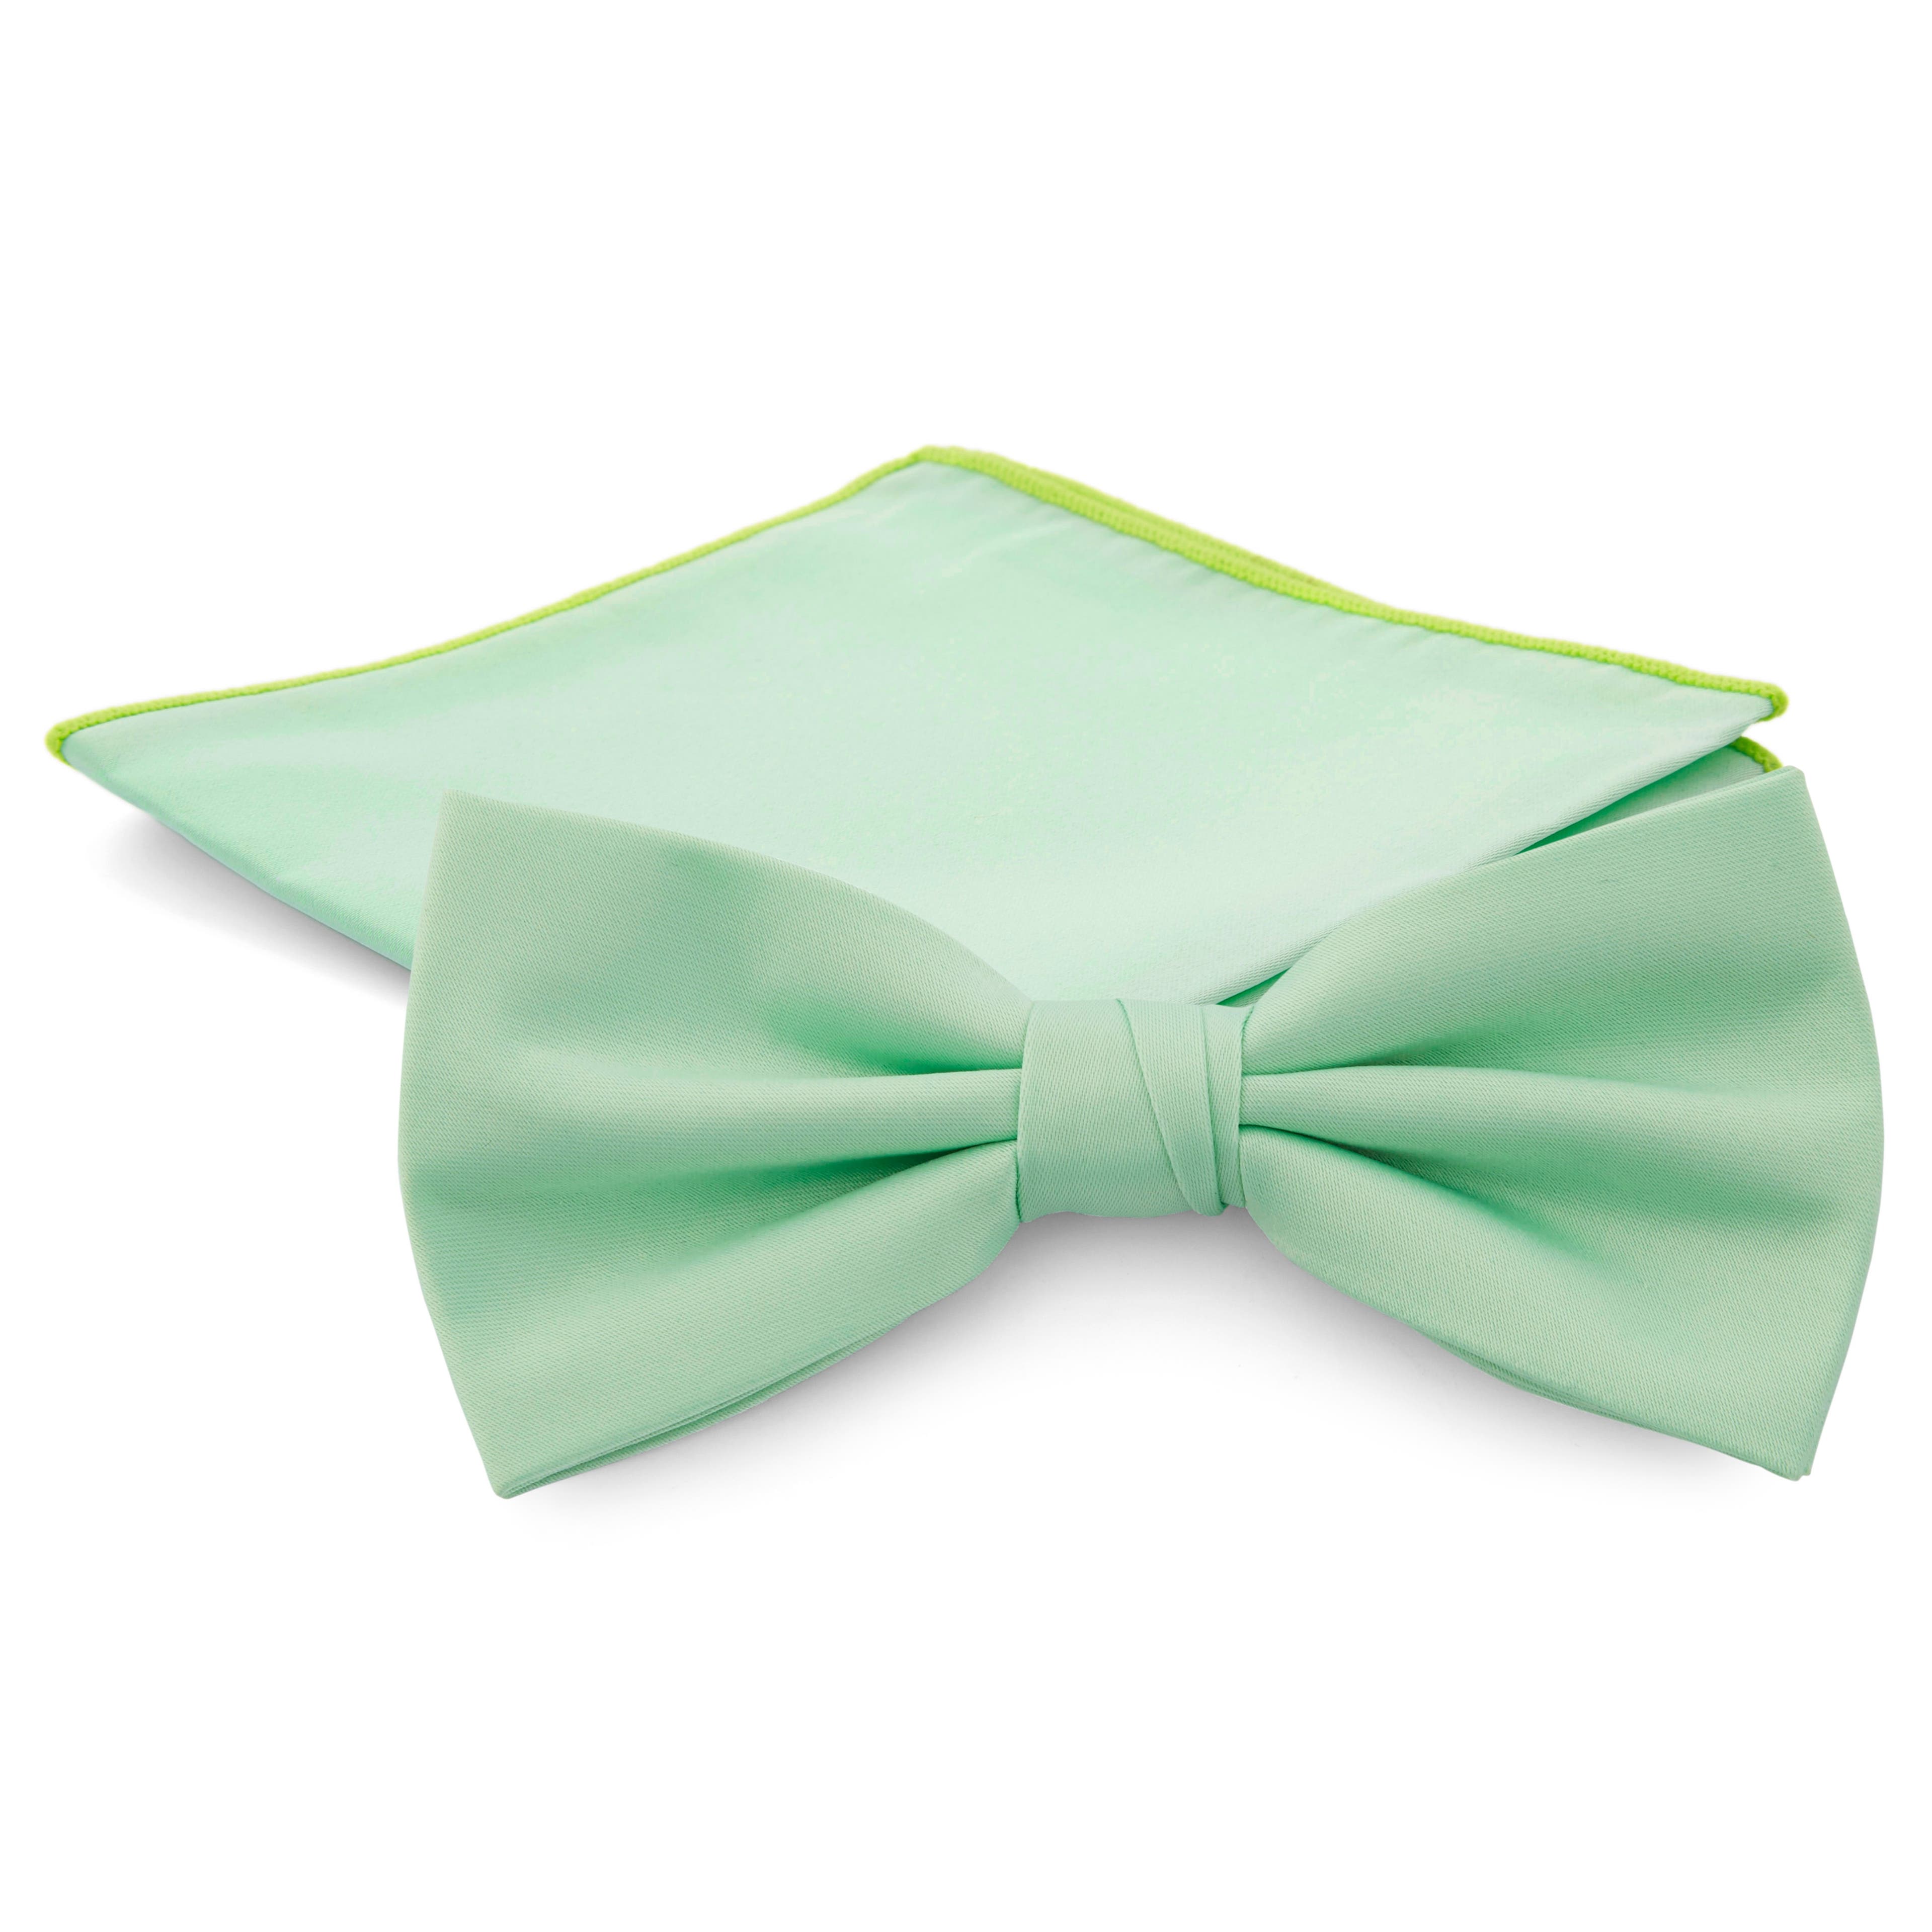 Mint Green Pre-Tied Bow Tie & Pocket Square Set